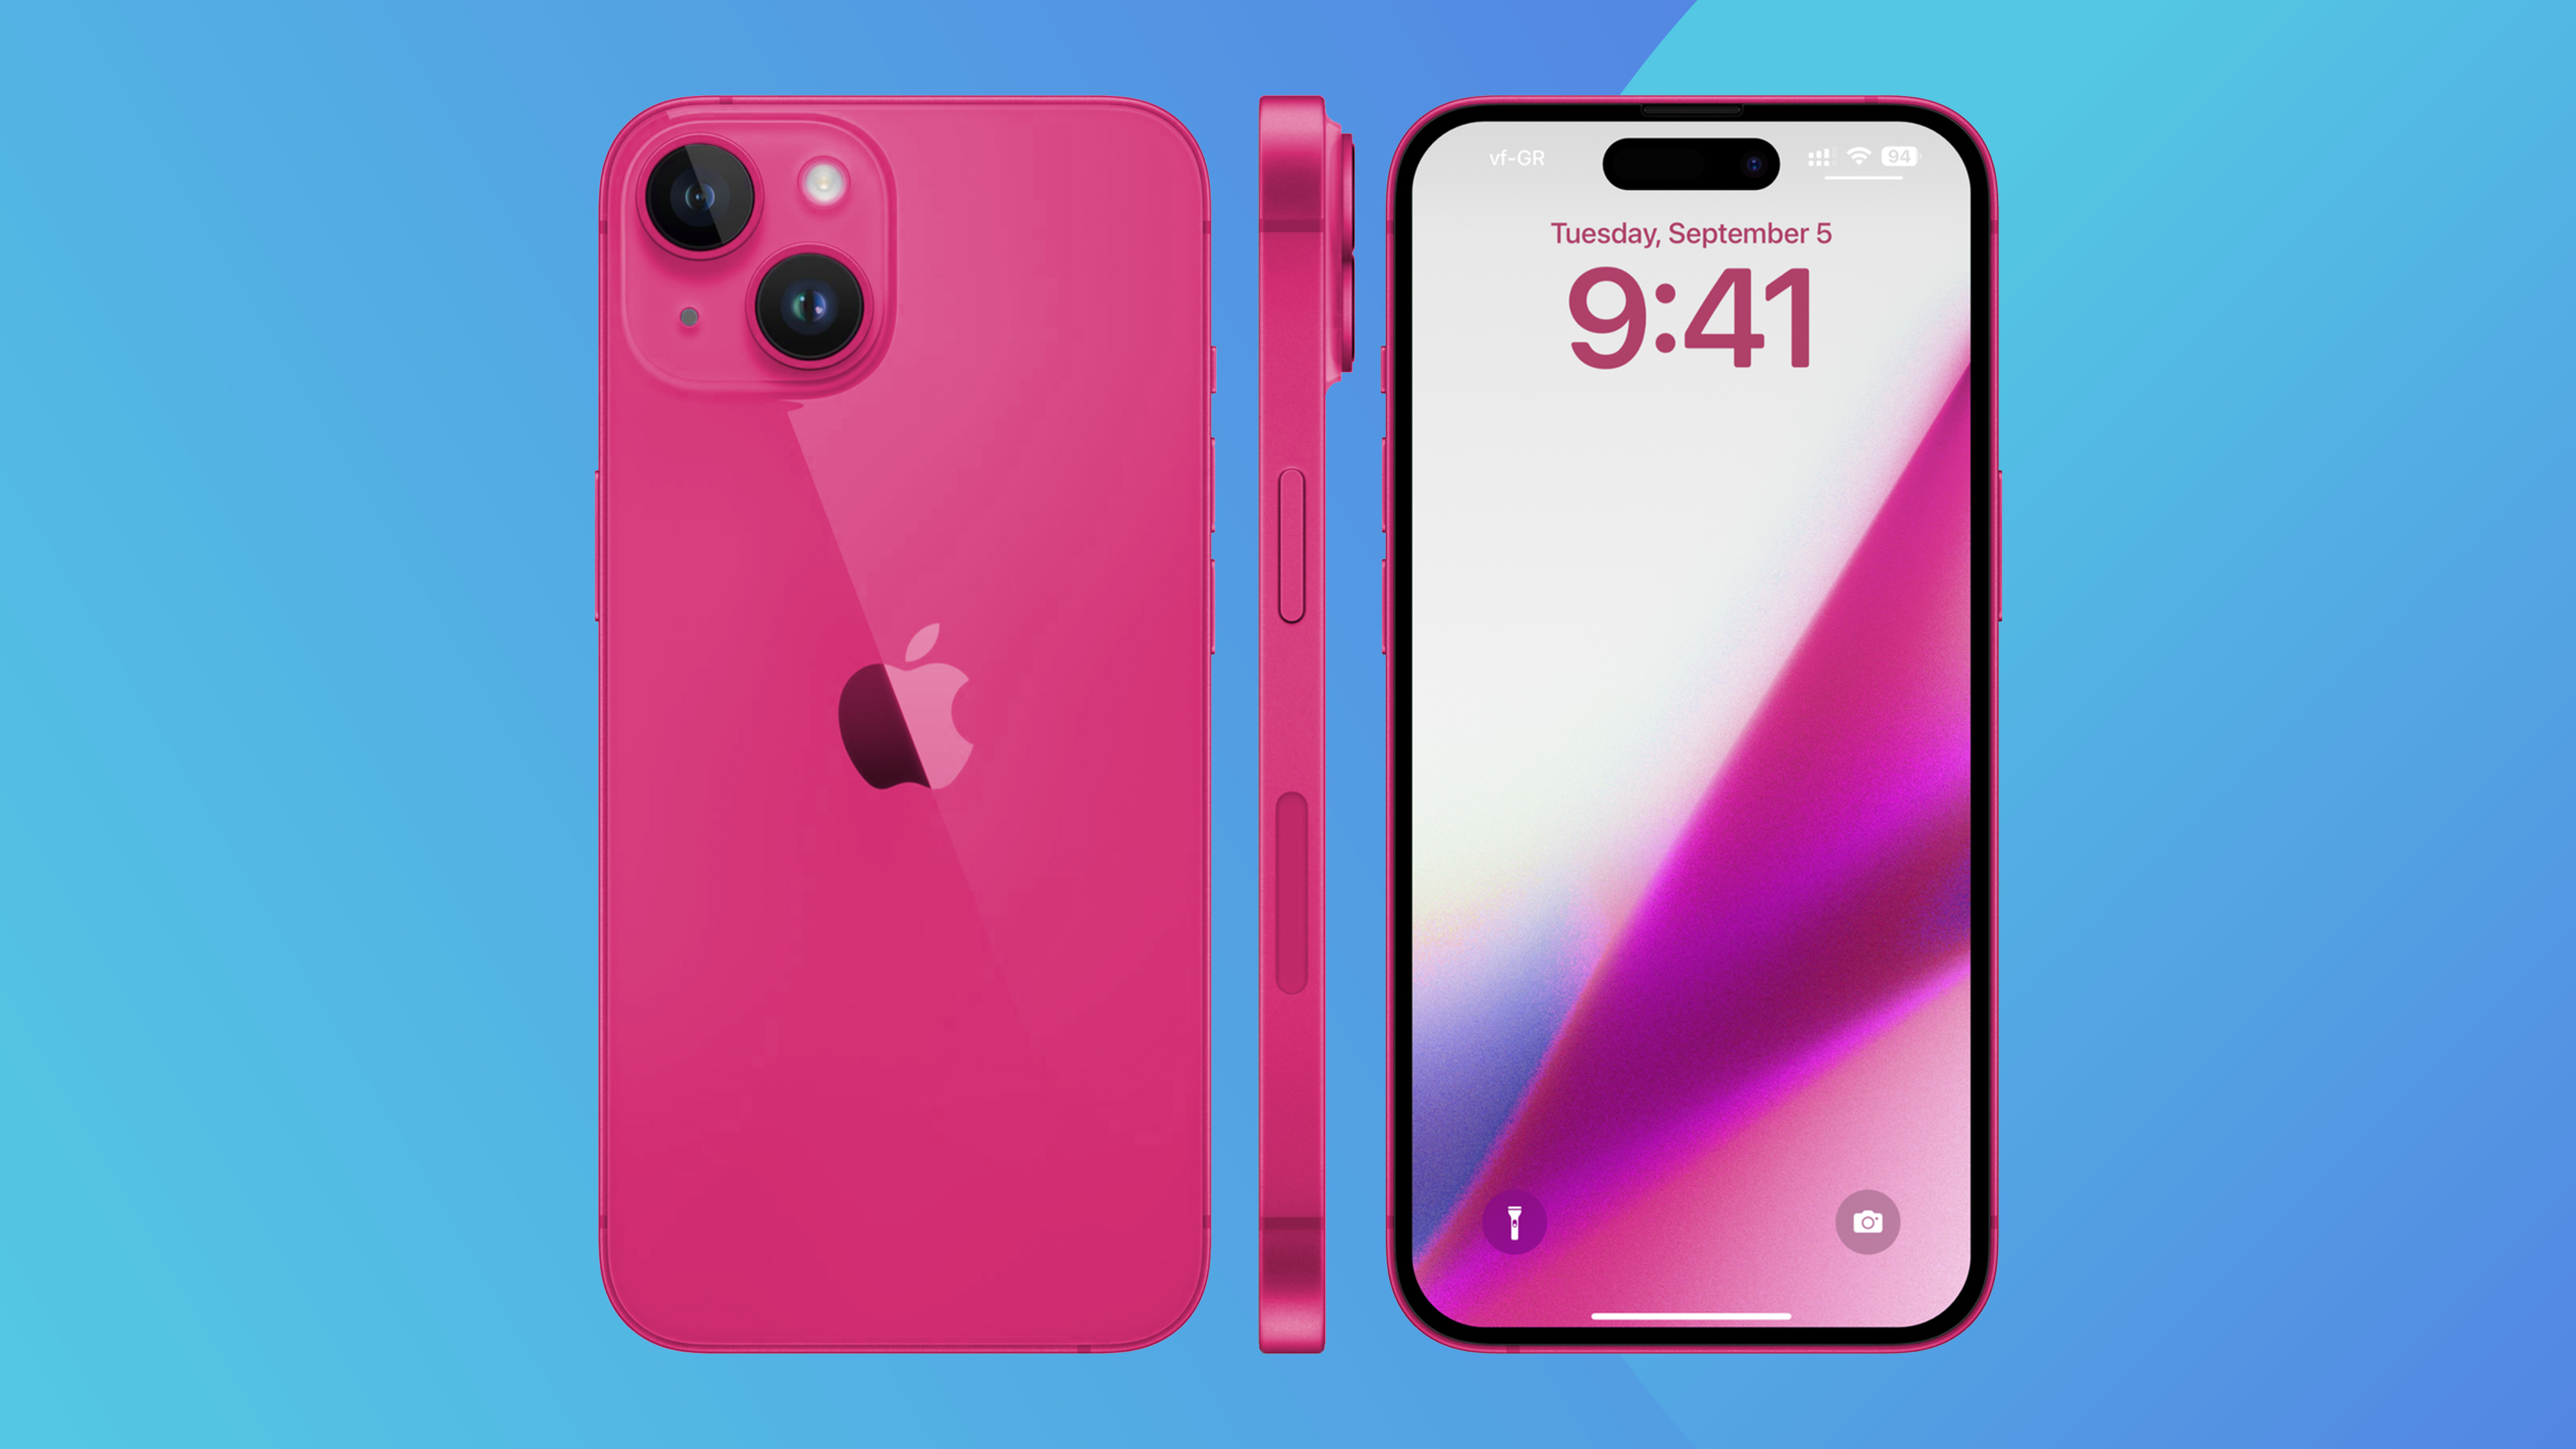 Is Apple finally dropping the hot pink iPhone we've been waiting for?